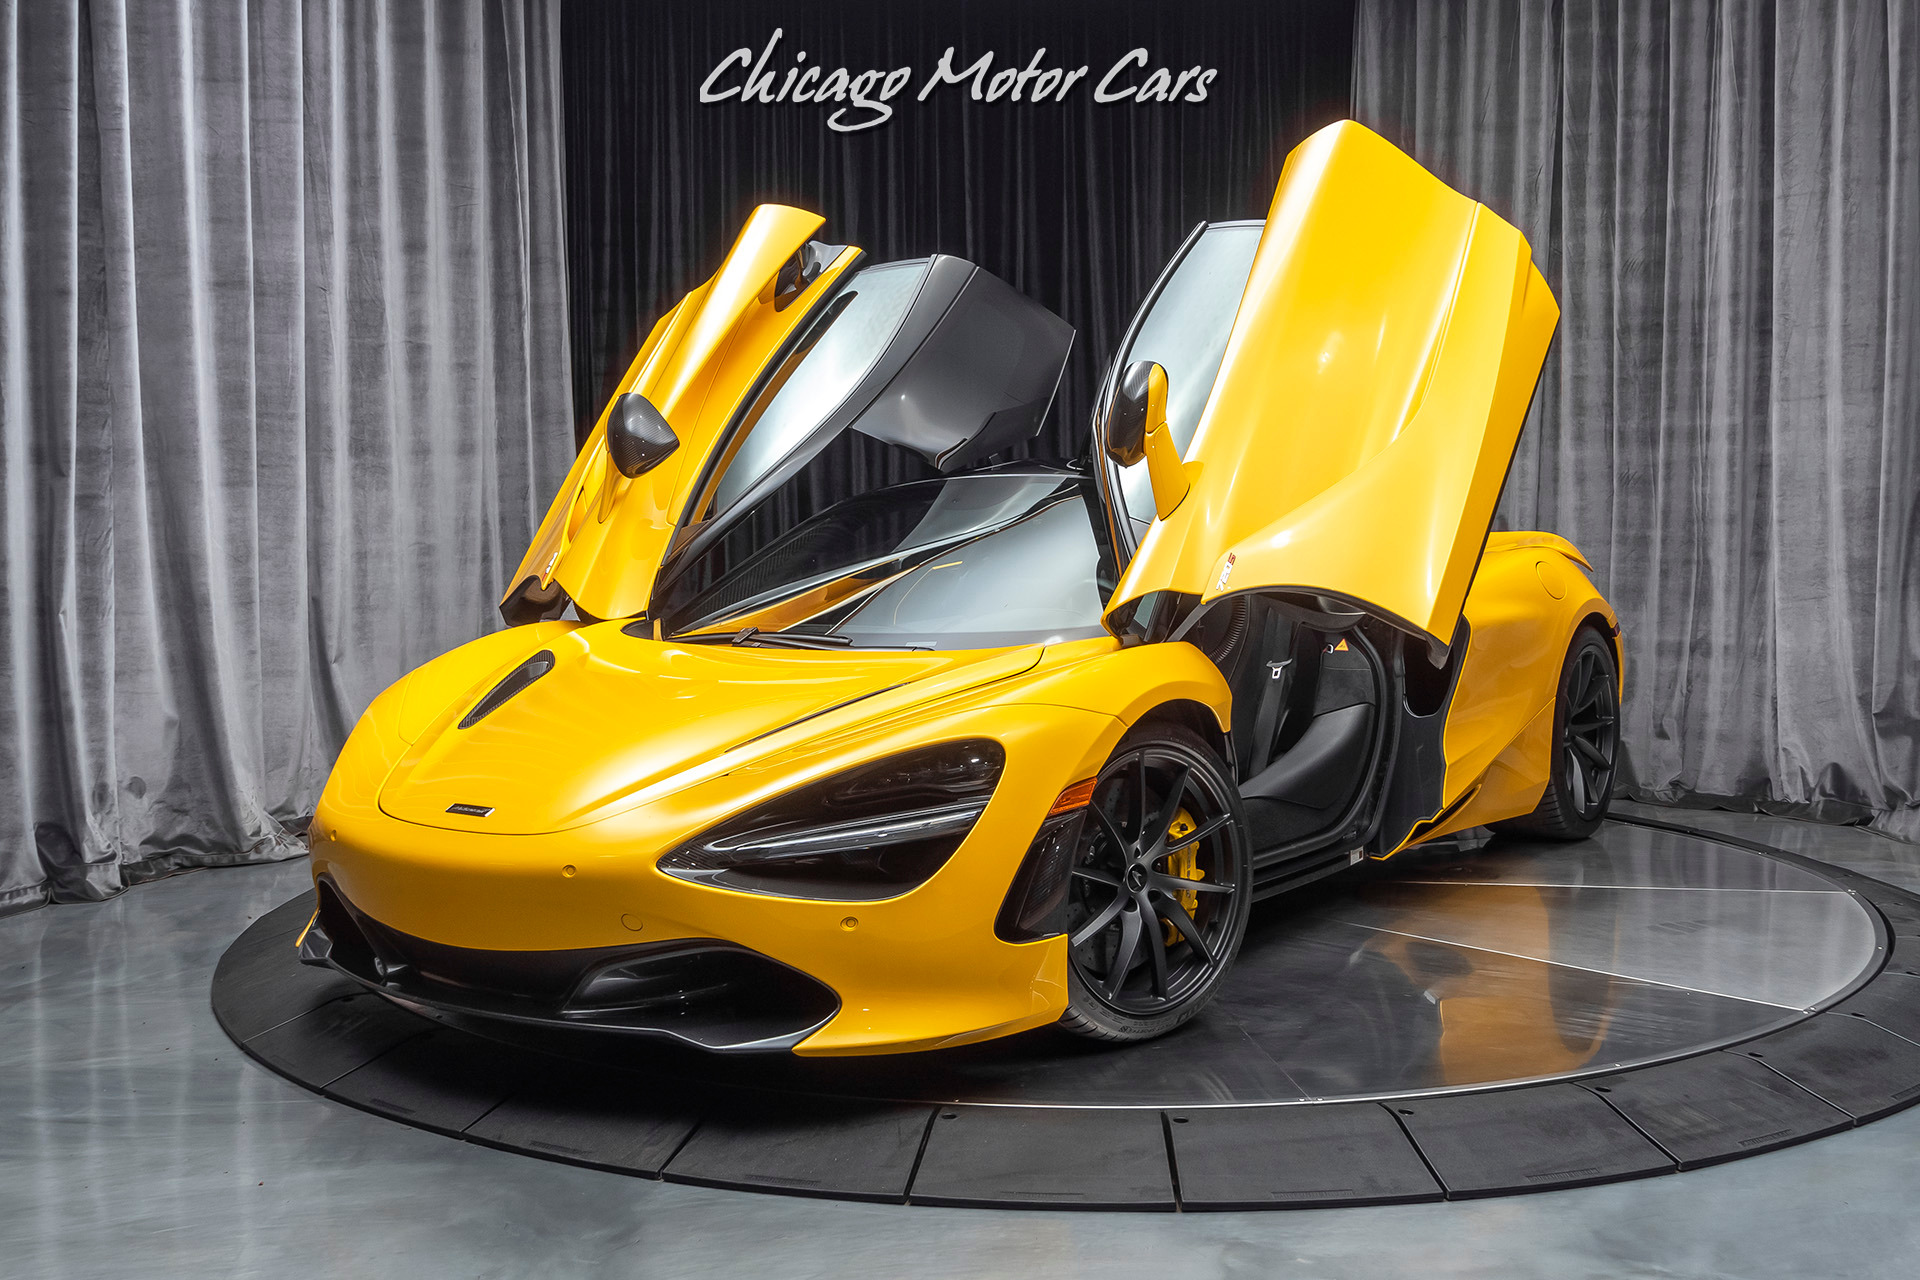 Used 2019 McLaren 720S Performance Coupe MSRP $369K+ LOADED with 